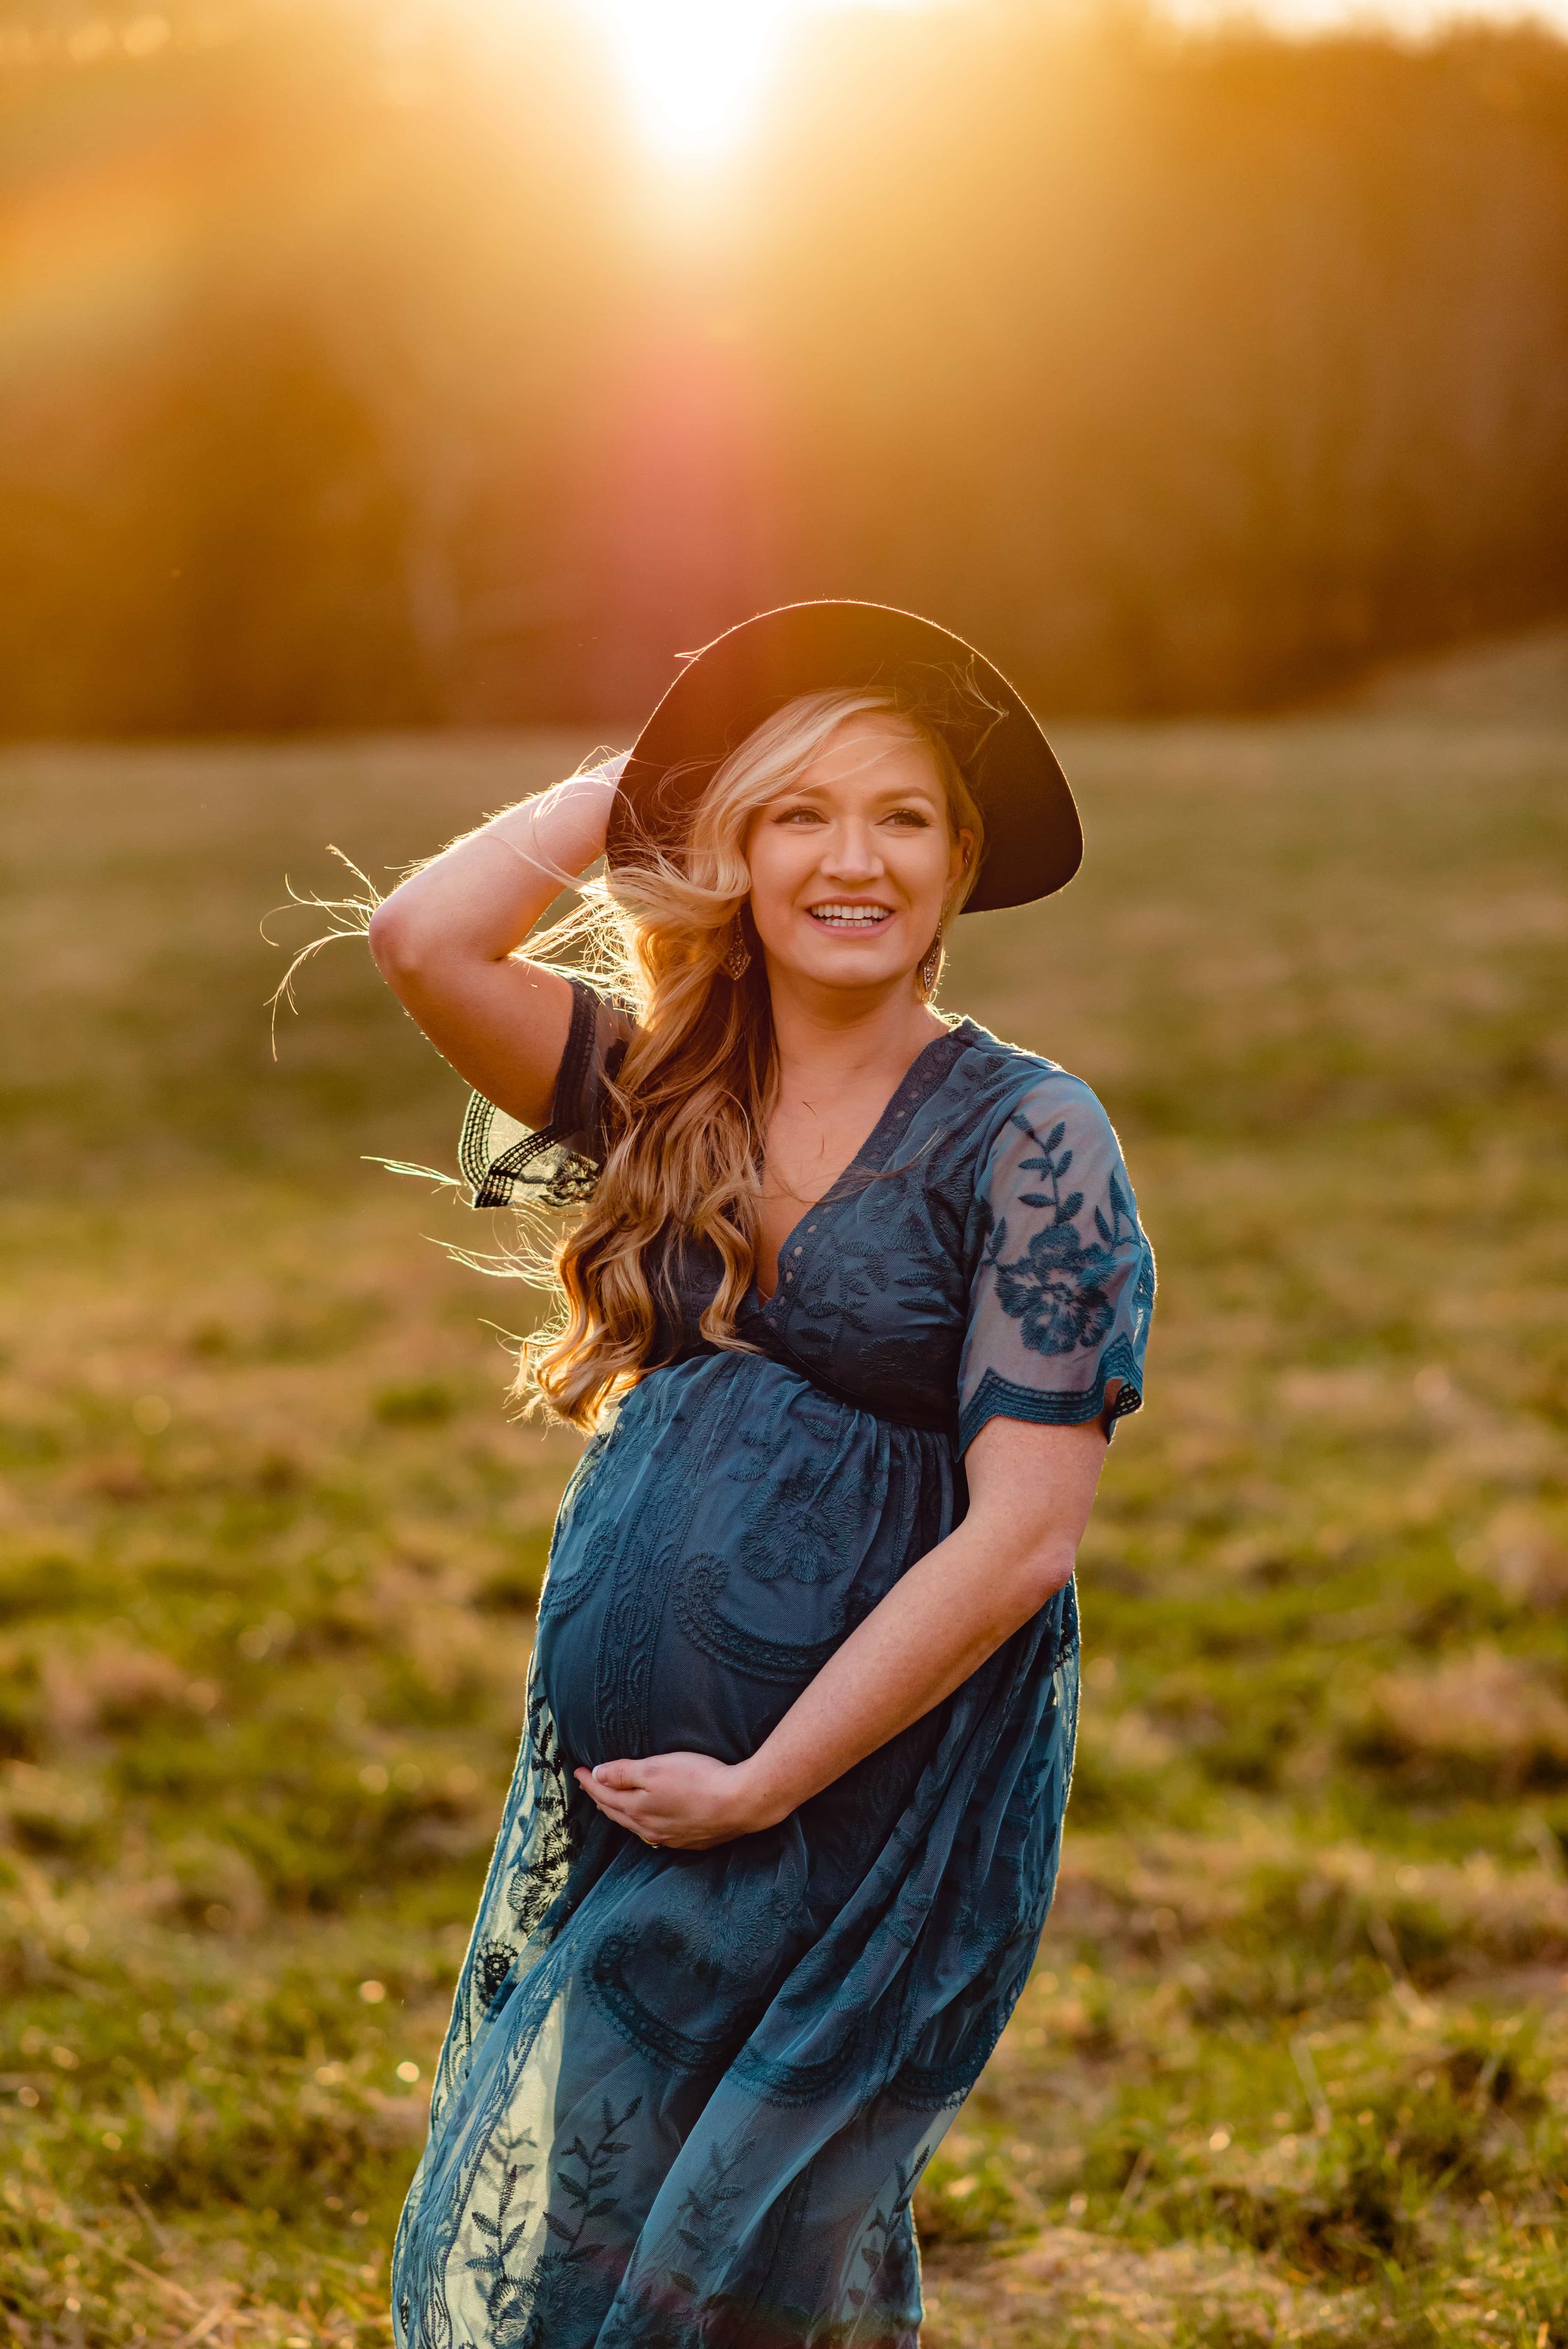 Maryland Maternity Photoshoot with smiling expecting mom and glowing sun beams